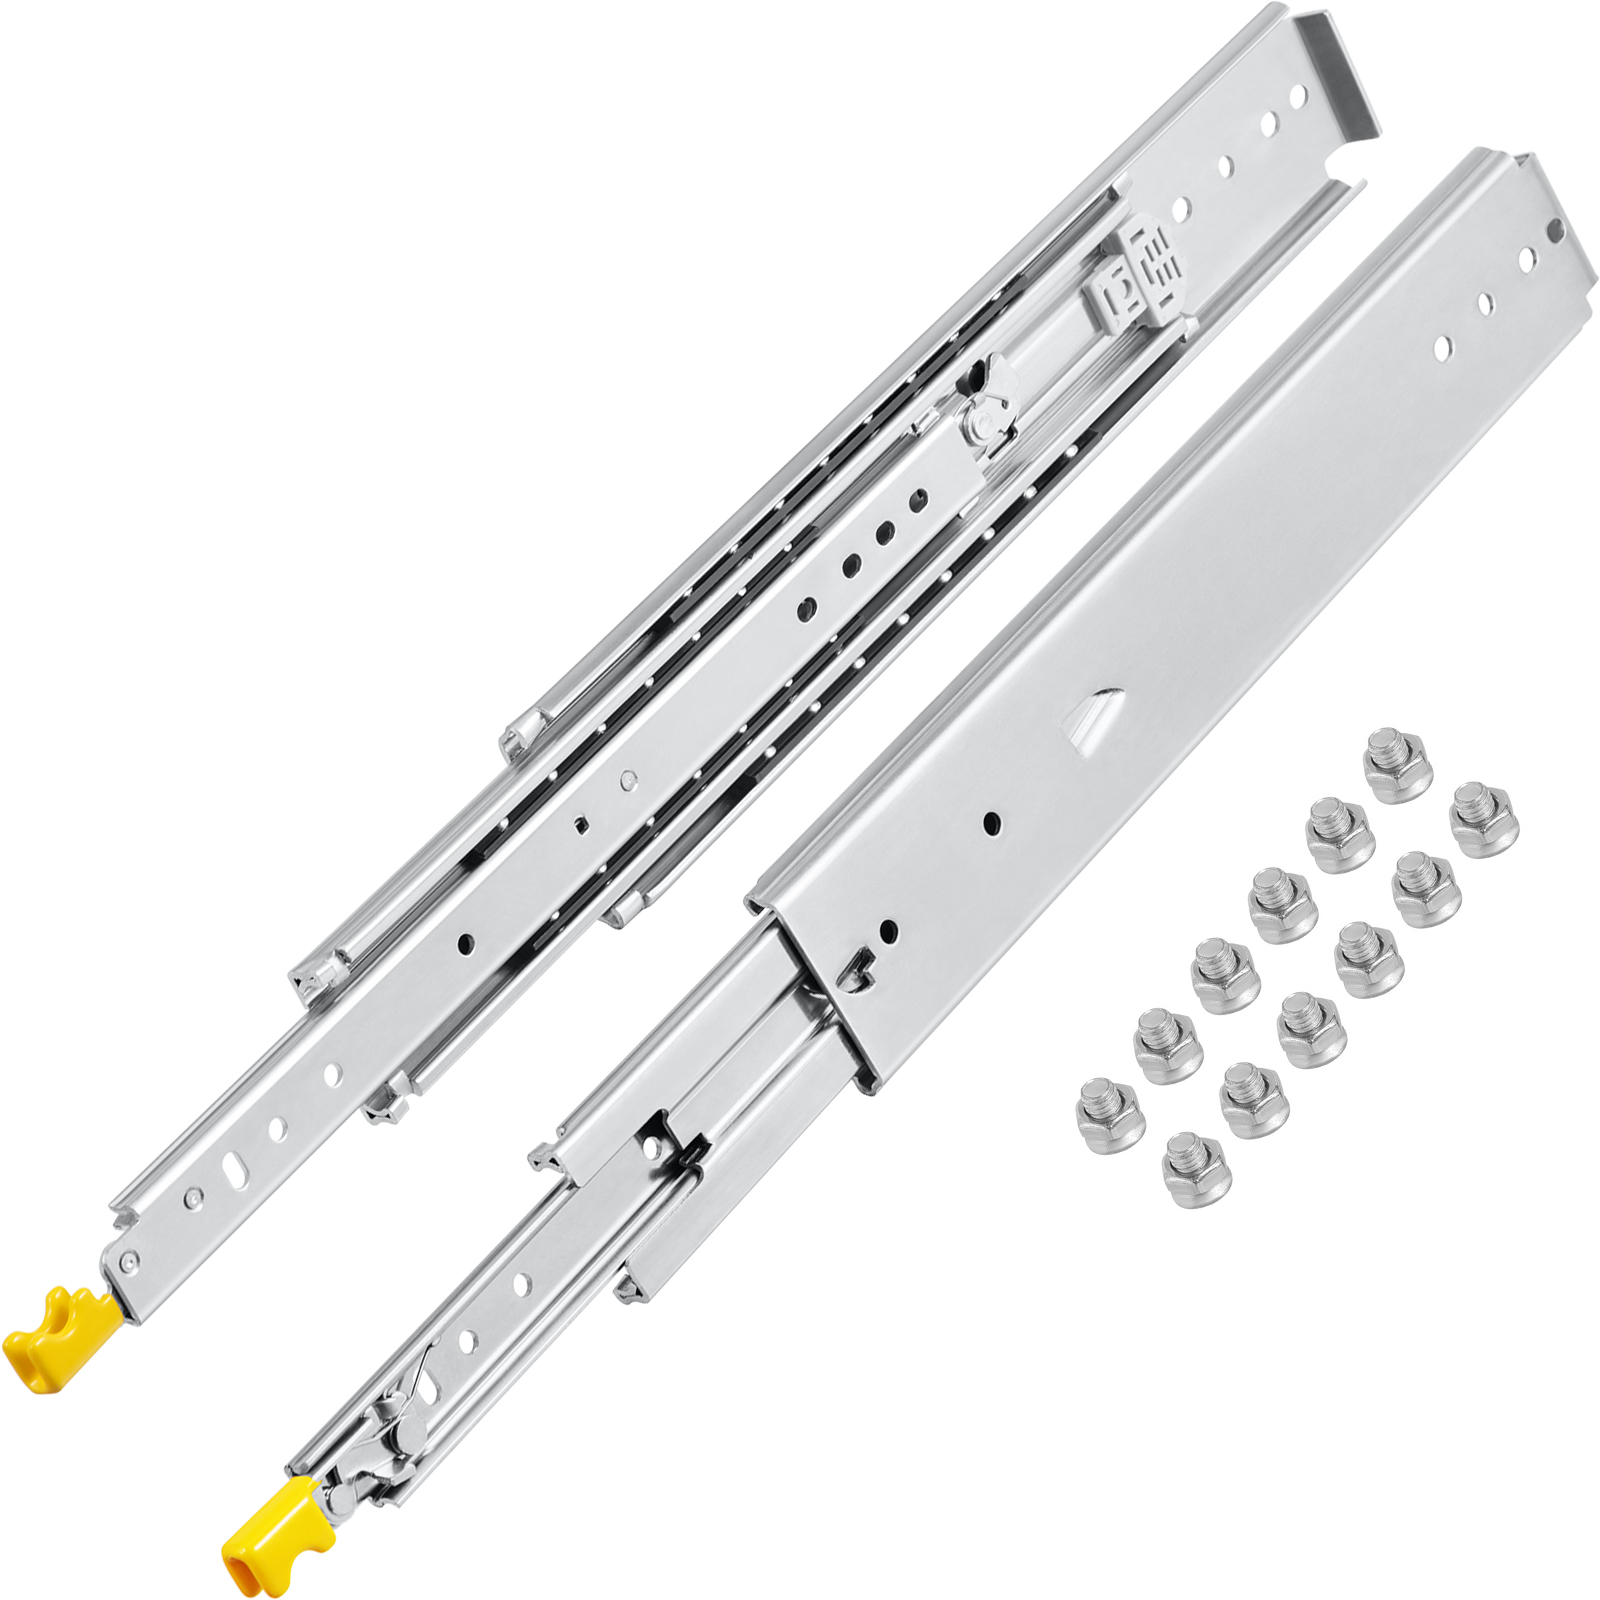 Drawer Slides,500 lbs Load Capacity,With Lock